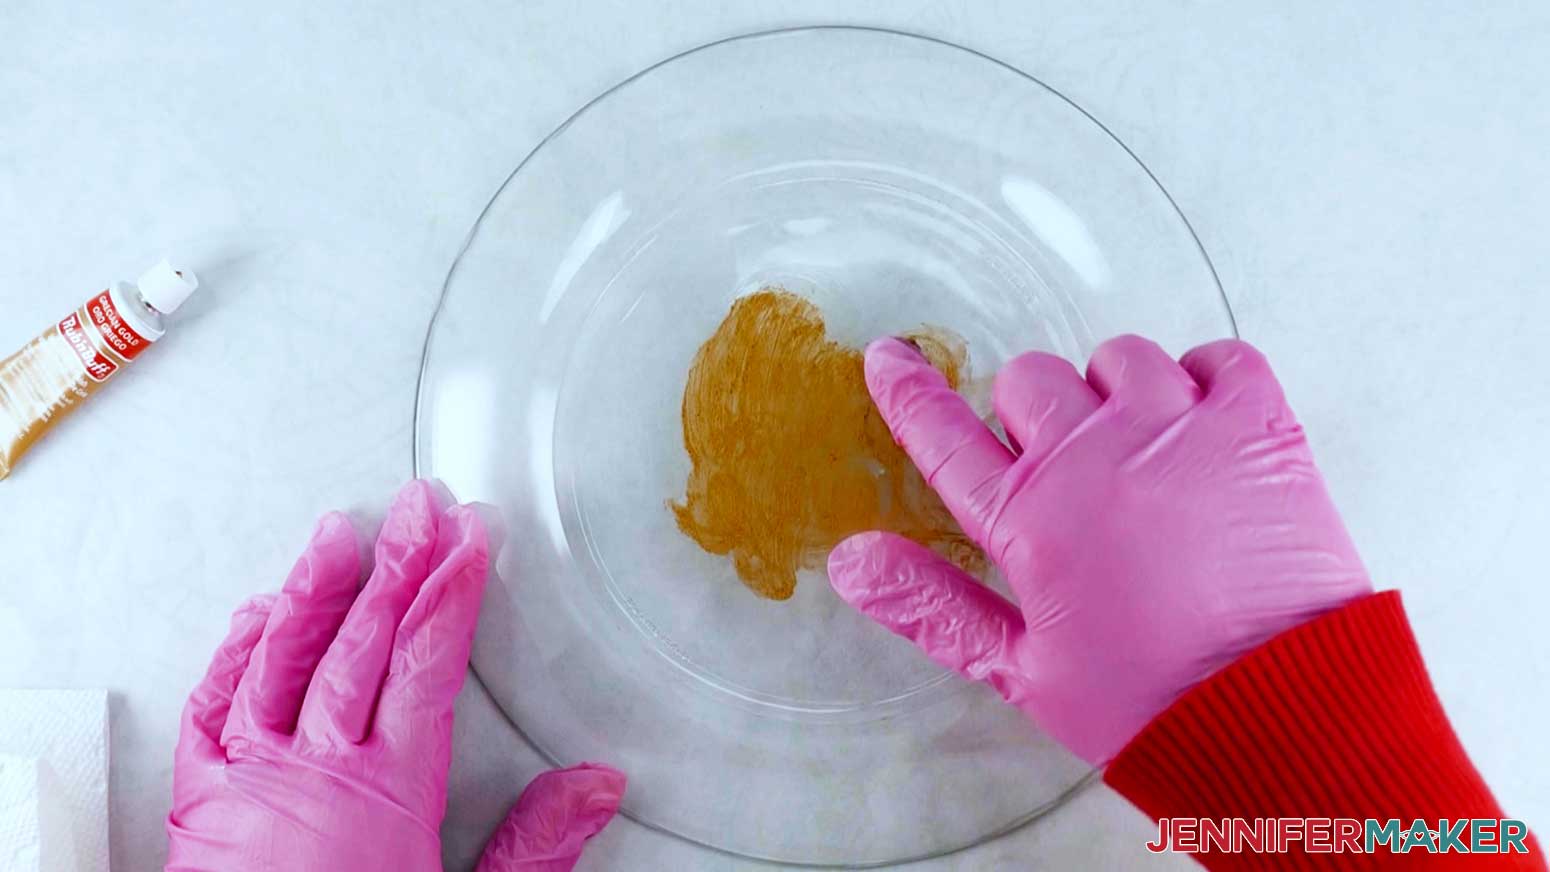 An overhead photo showing gold Rub n Buff paint being applied to a clear plate with a finger wearing a pink glove. Another gloved hand holds the plate in place, and a tube of Rub n Buff paint and a paper towel are displayed on the left.